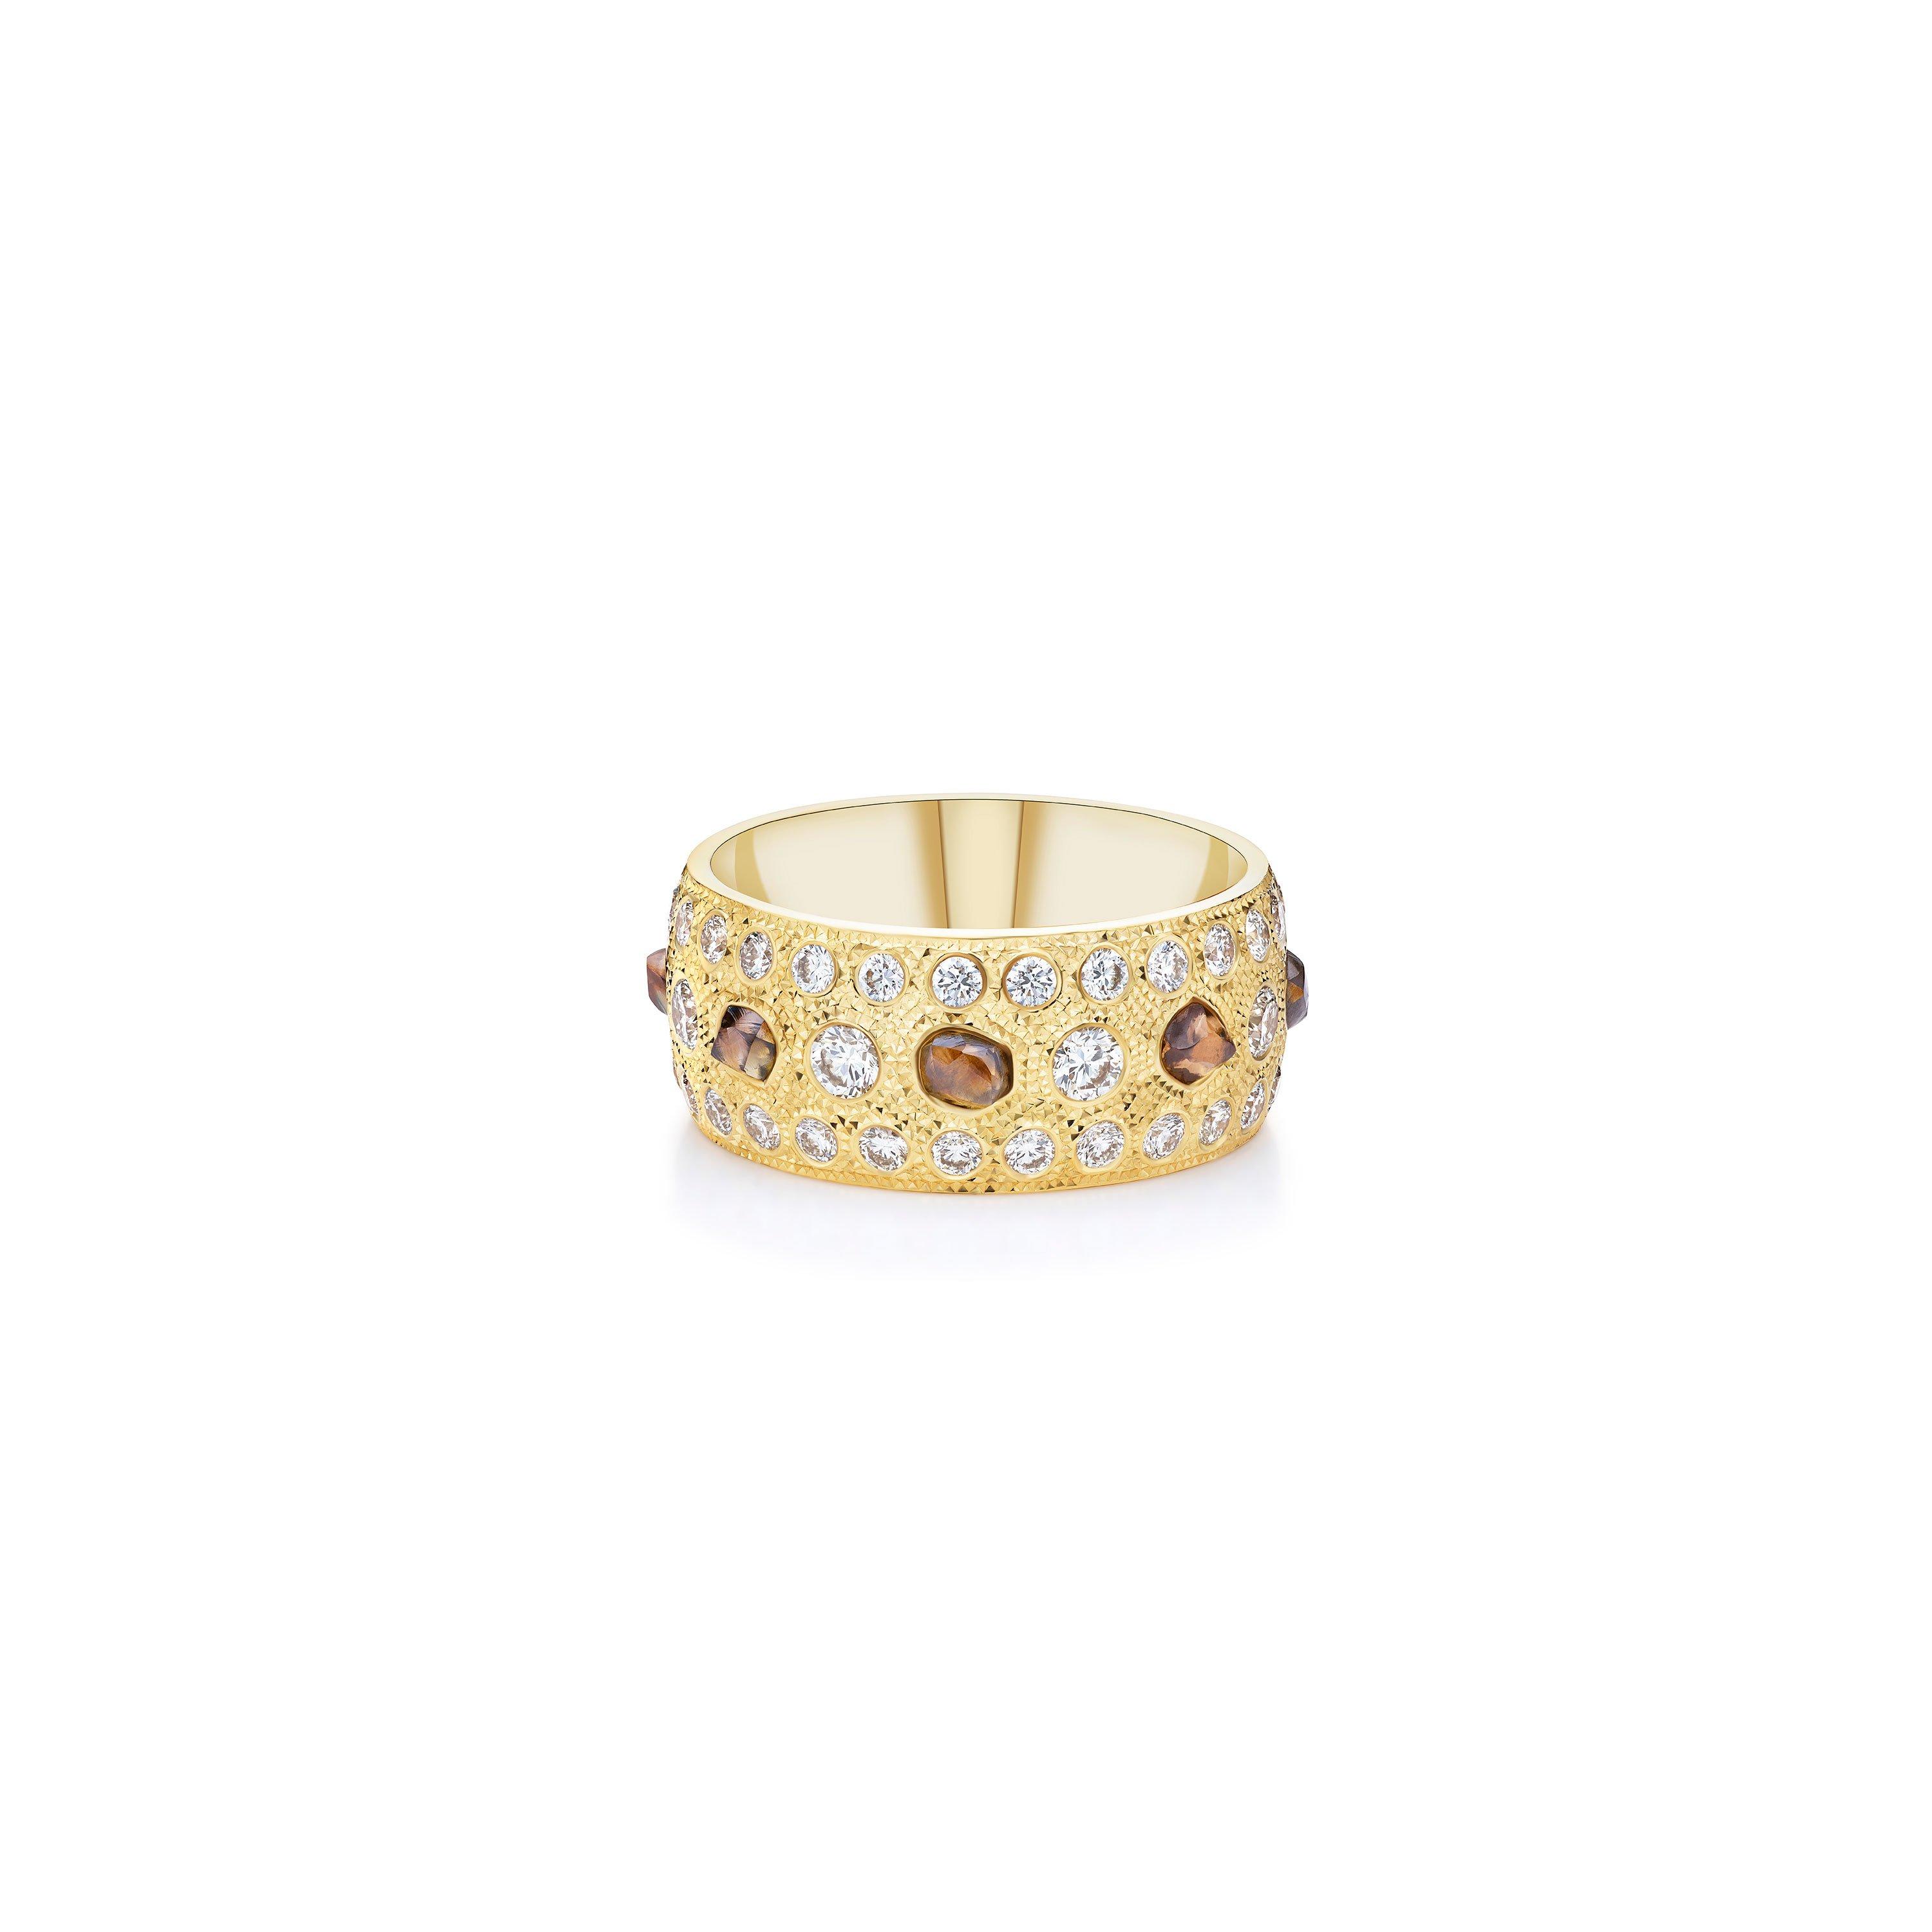 Talisman large band in yellow gold | De Beers US